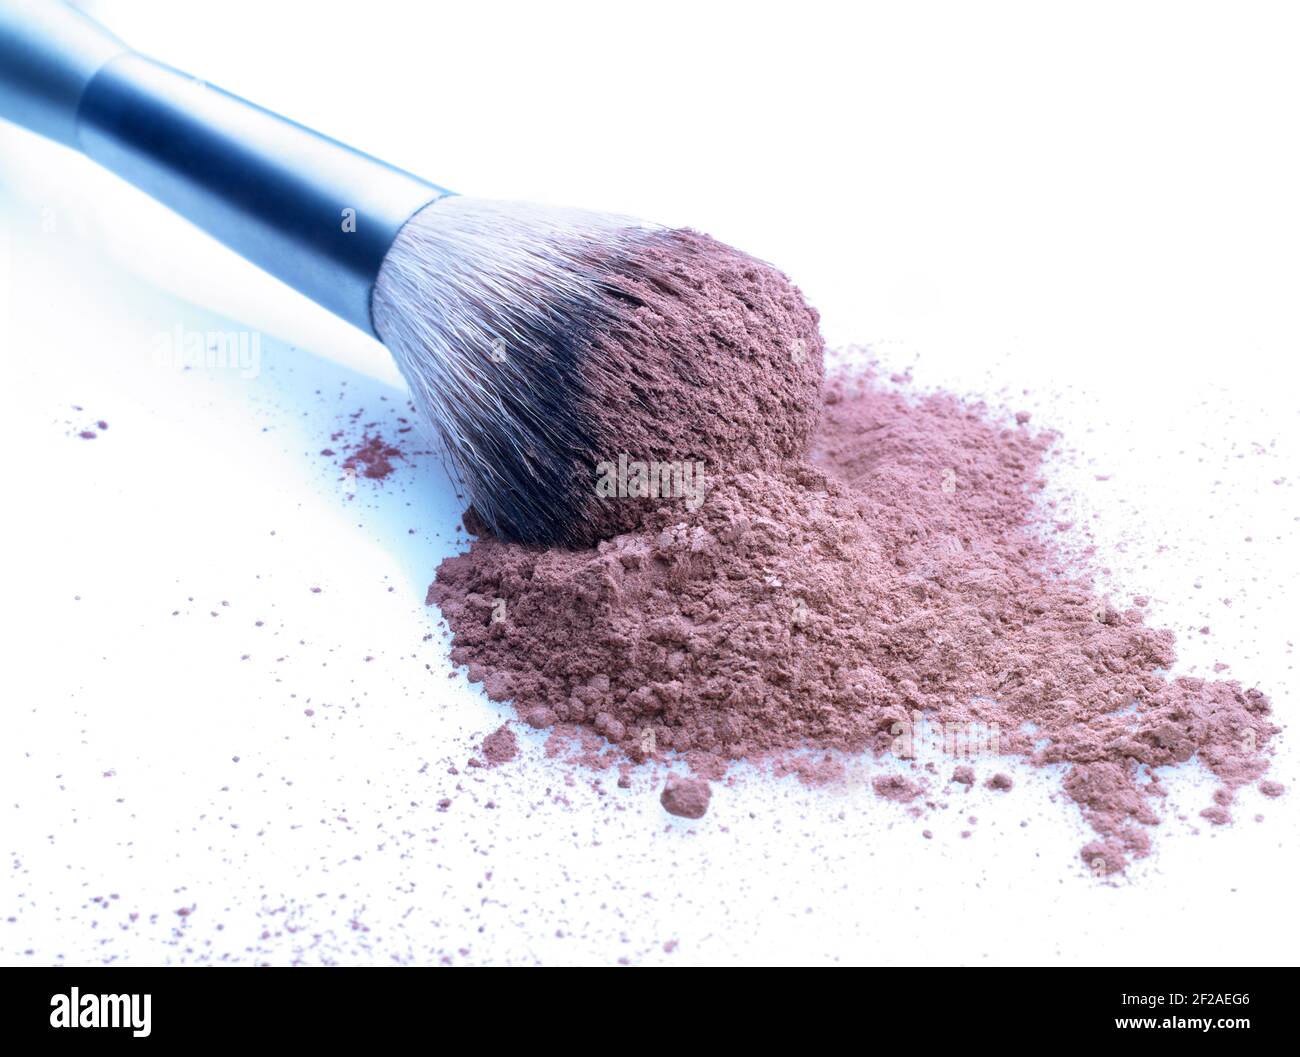 Shallow depth of field on brush and cosmetic loose powder on a stained white background. Slightly cool toned Stock Photo